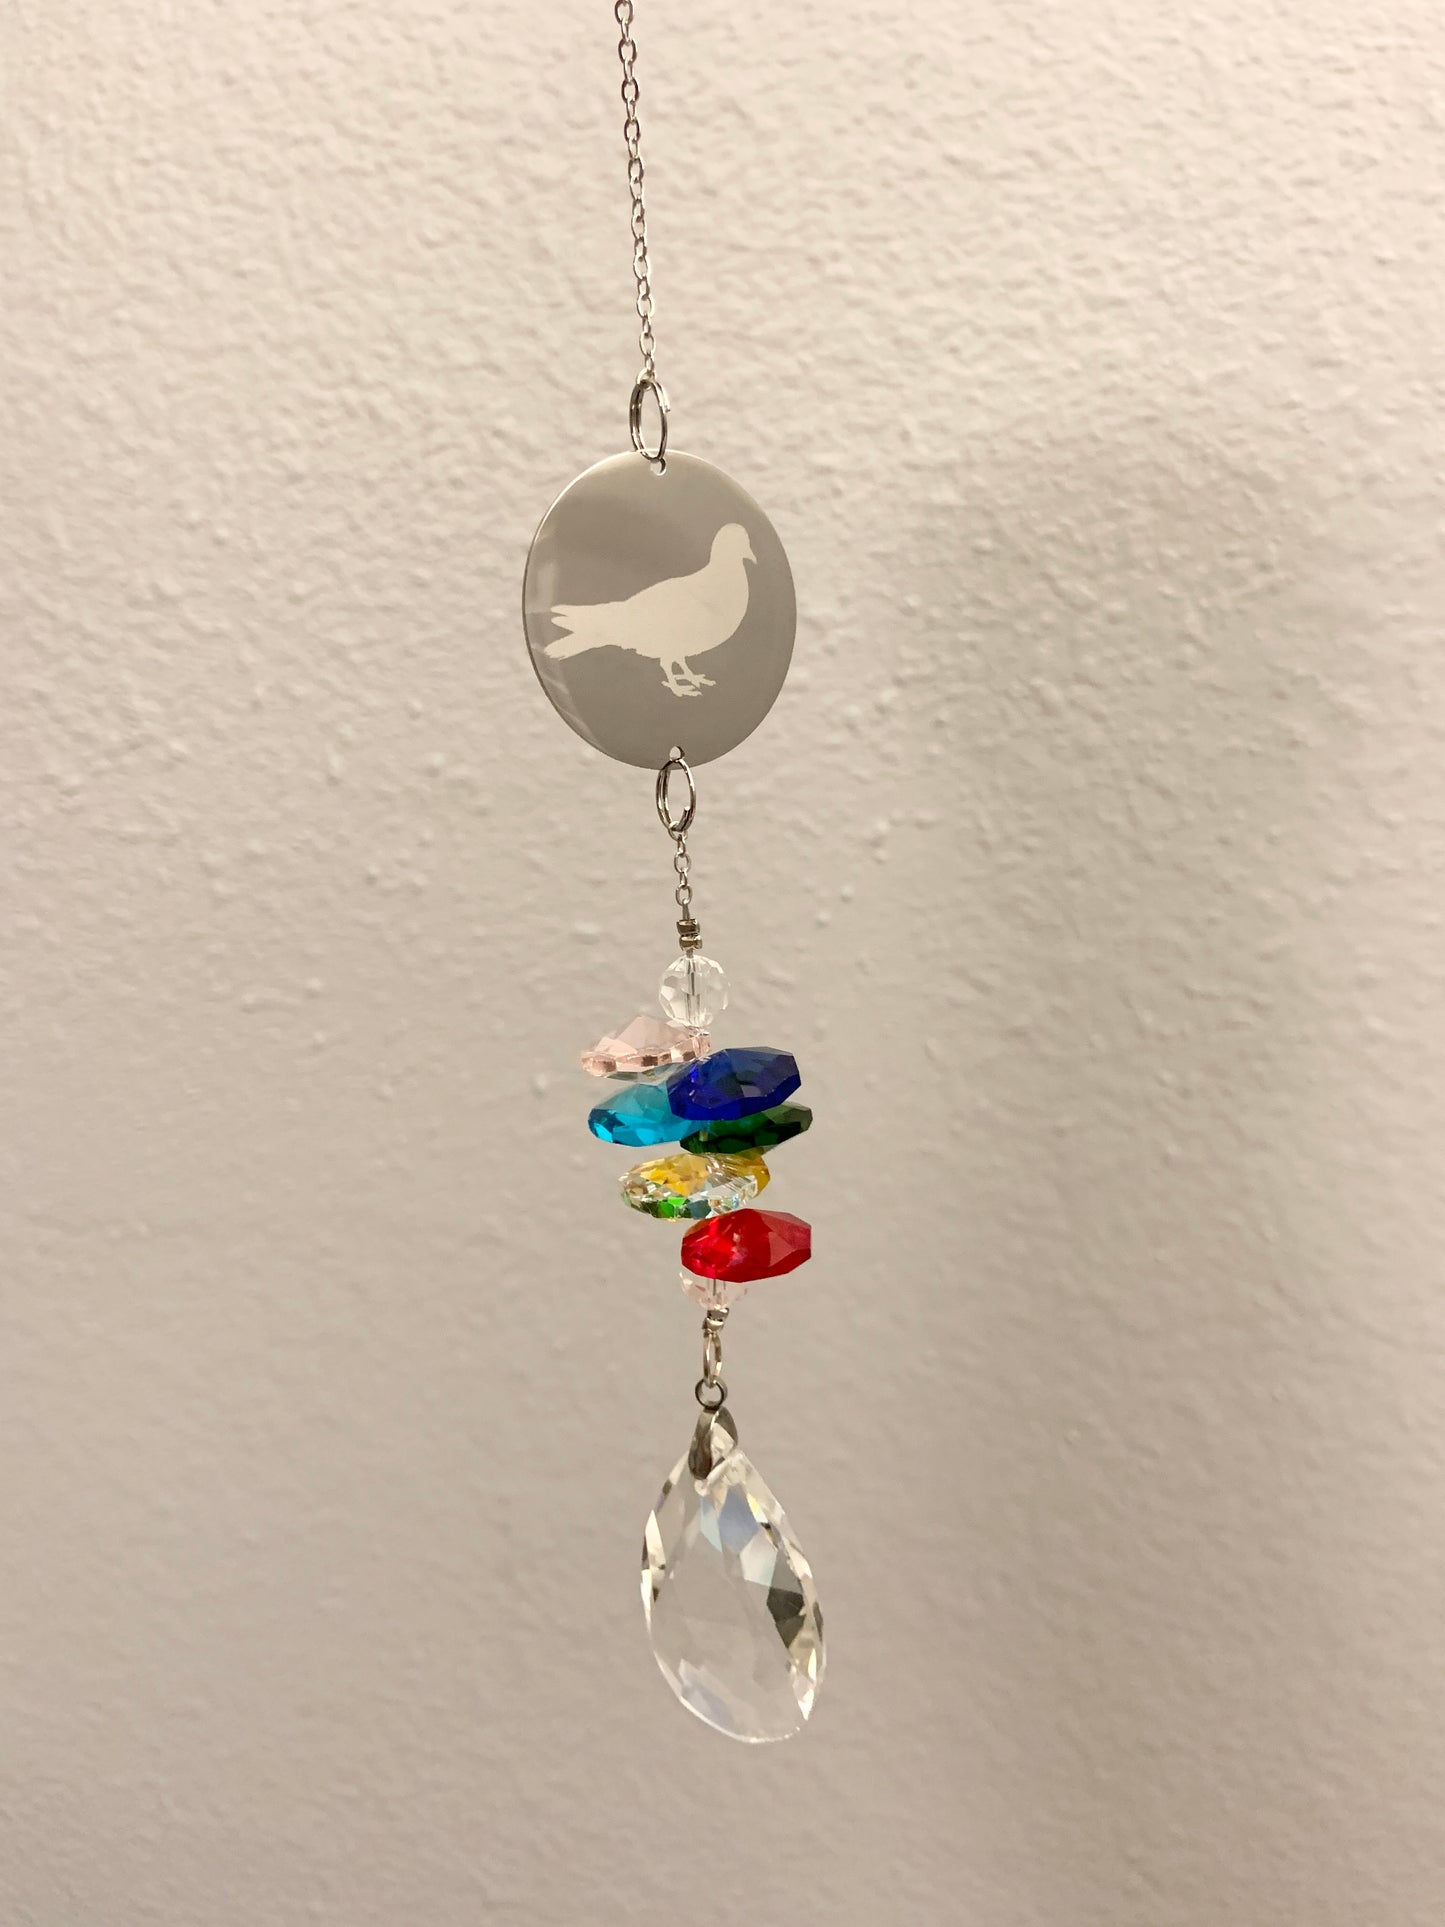 Reminders of Him | Colleen Hoover | Is That a F*cking Pigeon | Sun Catcher